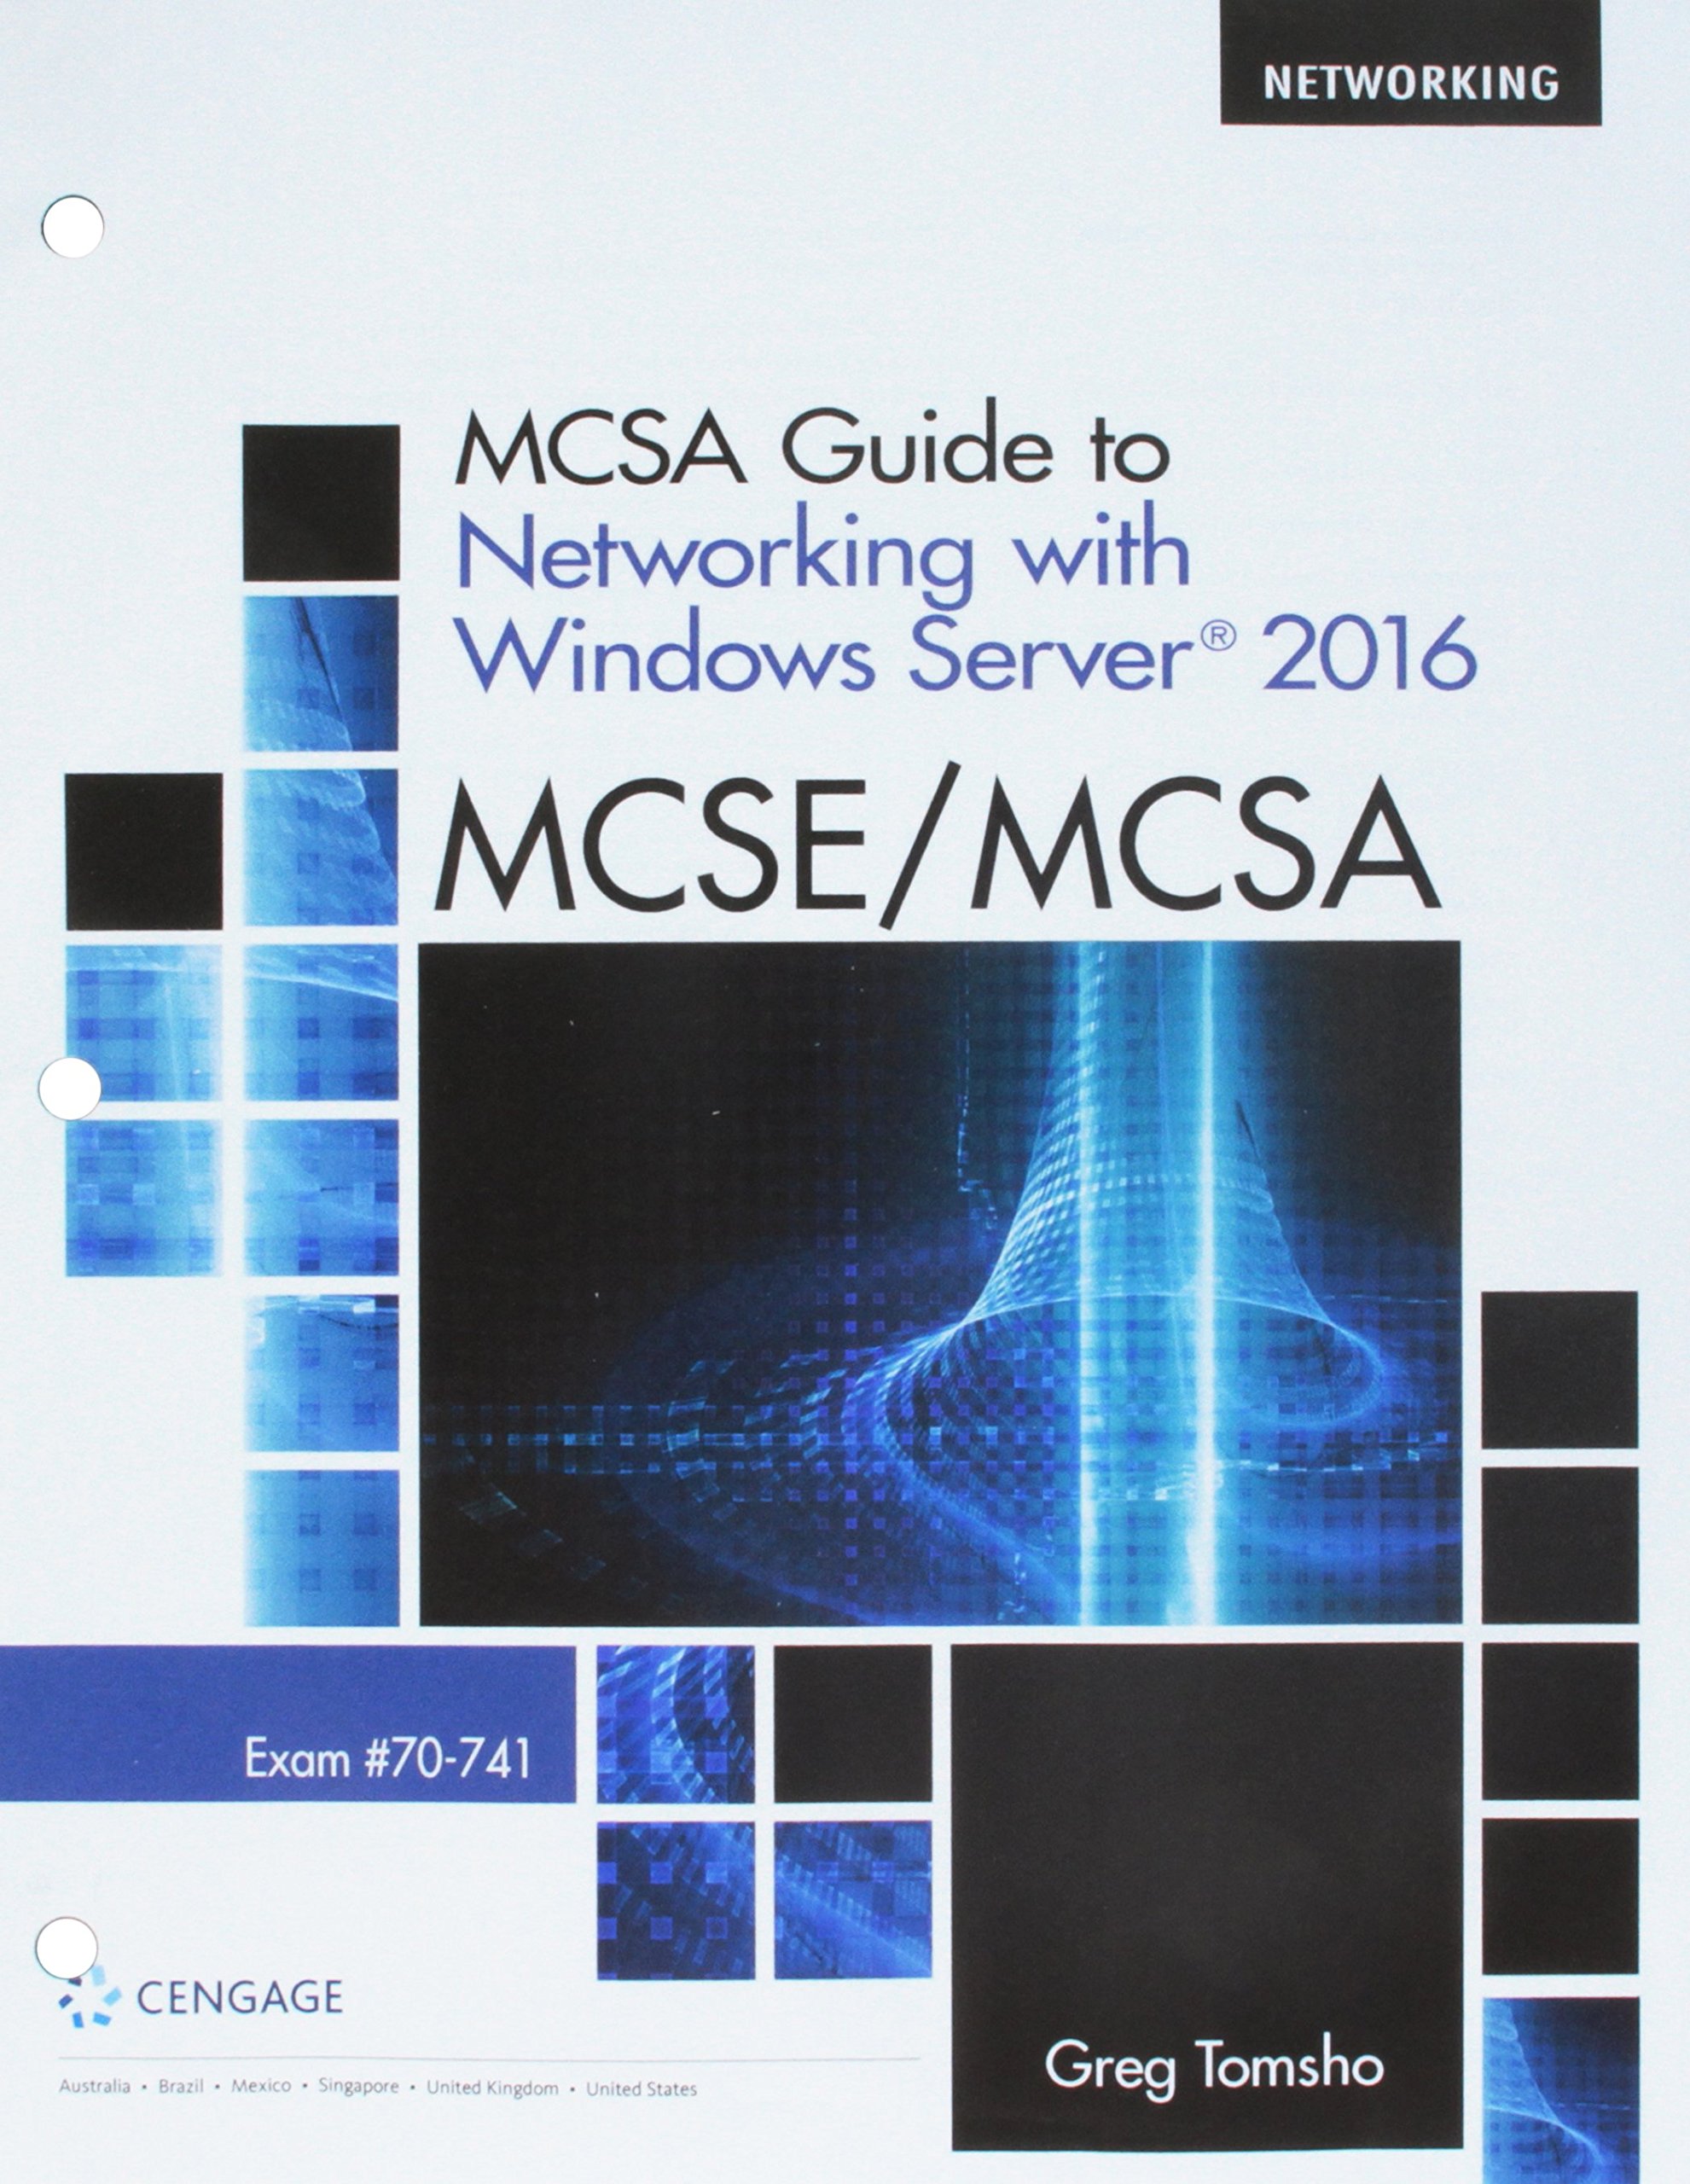 MCSA Guide to Networking with Windows Server 2016, Exam 70-741, Loose-Leaf Version